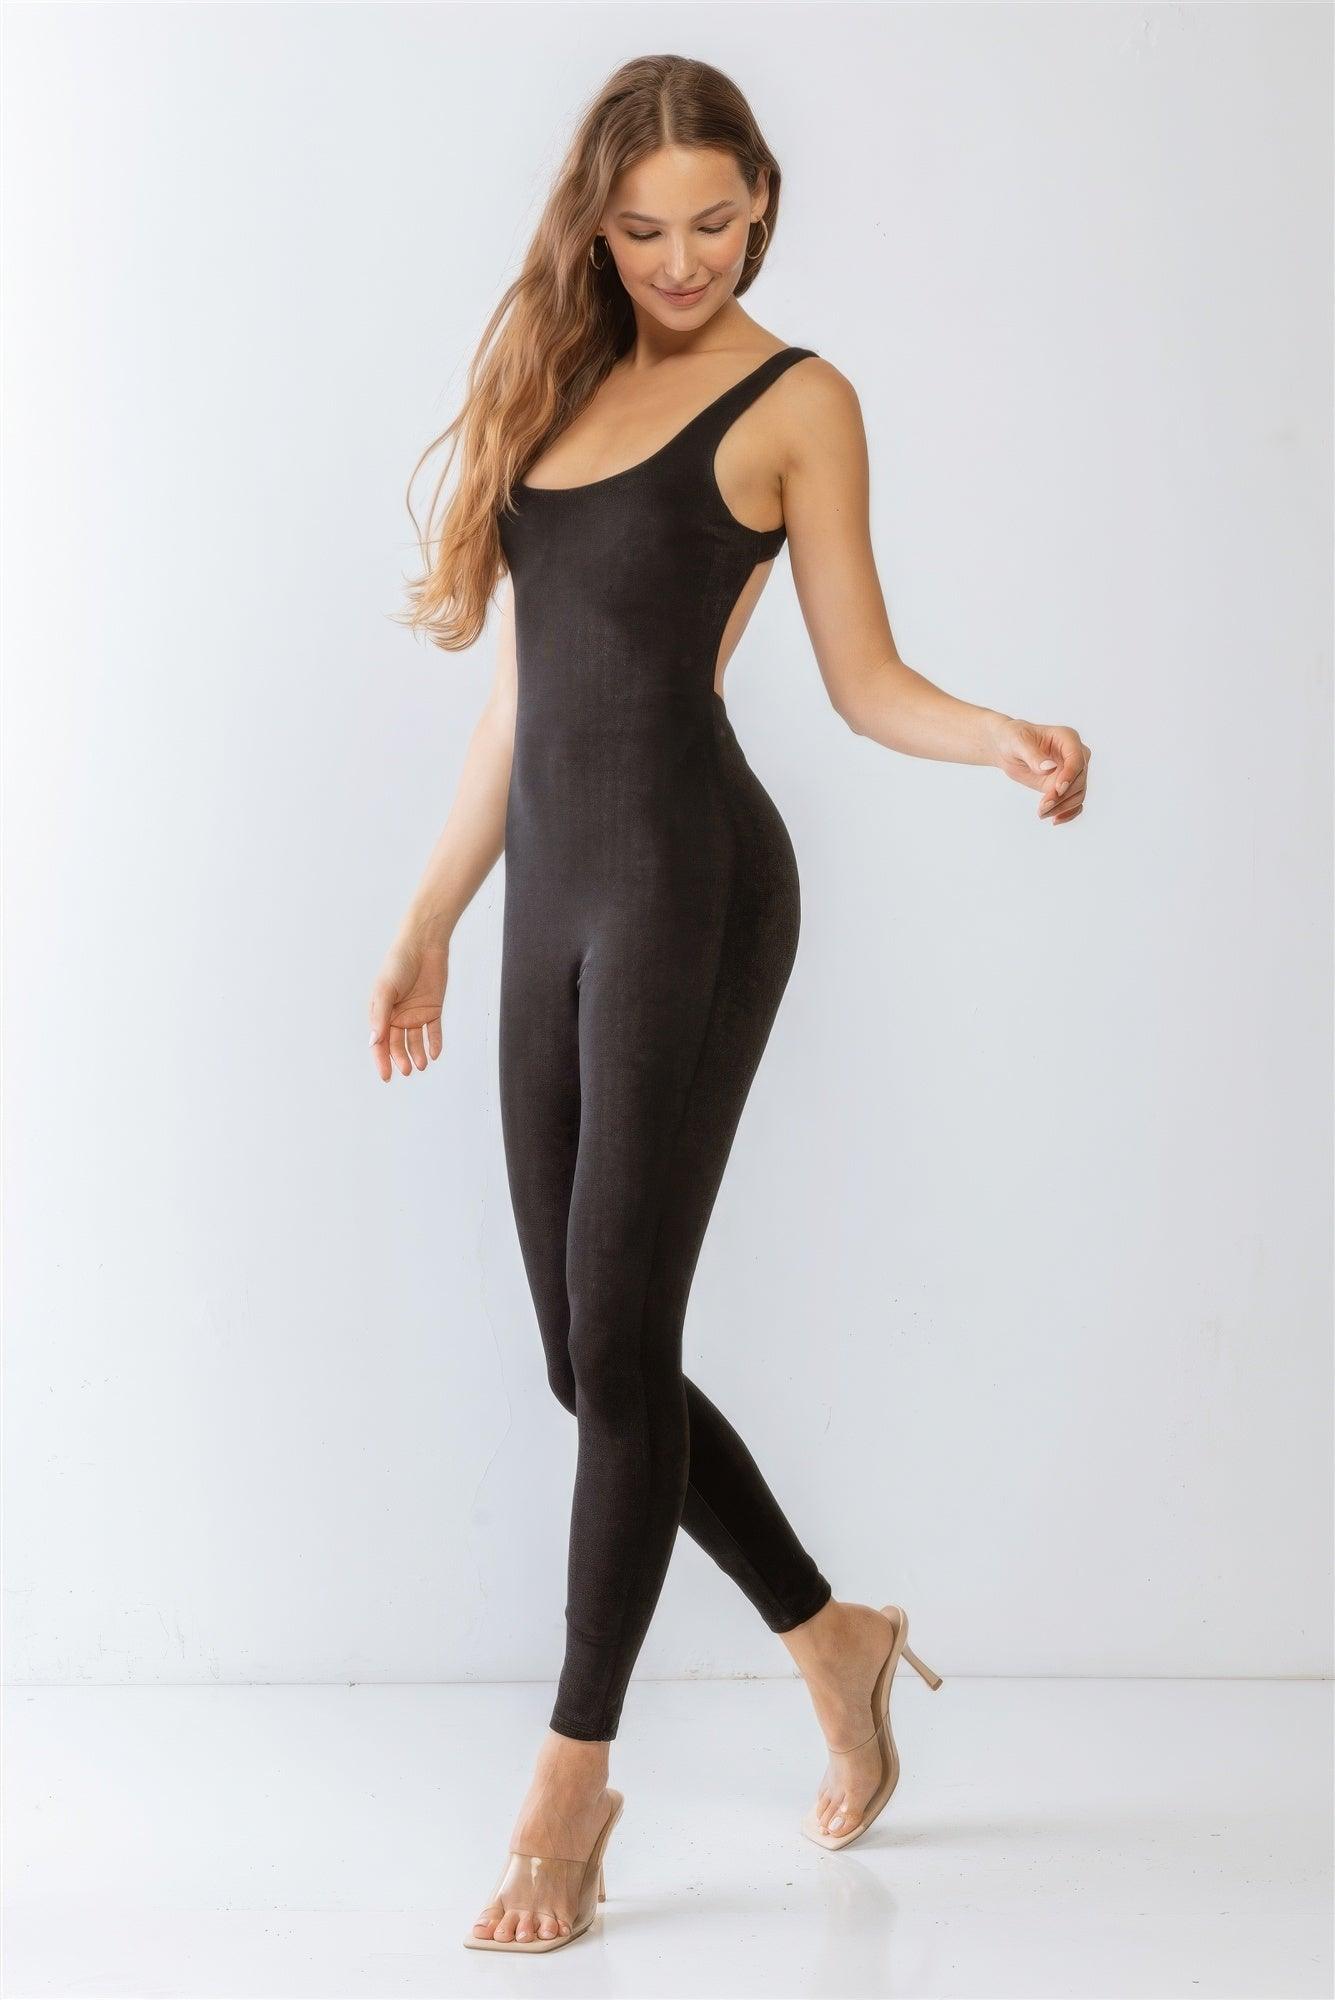 Black Sleeveless Cut-out Detail Slim Fit Jumpsuit & Open Front Long Sleeve Cardigan Set - AMIClubwear